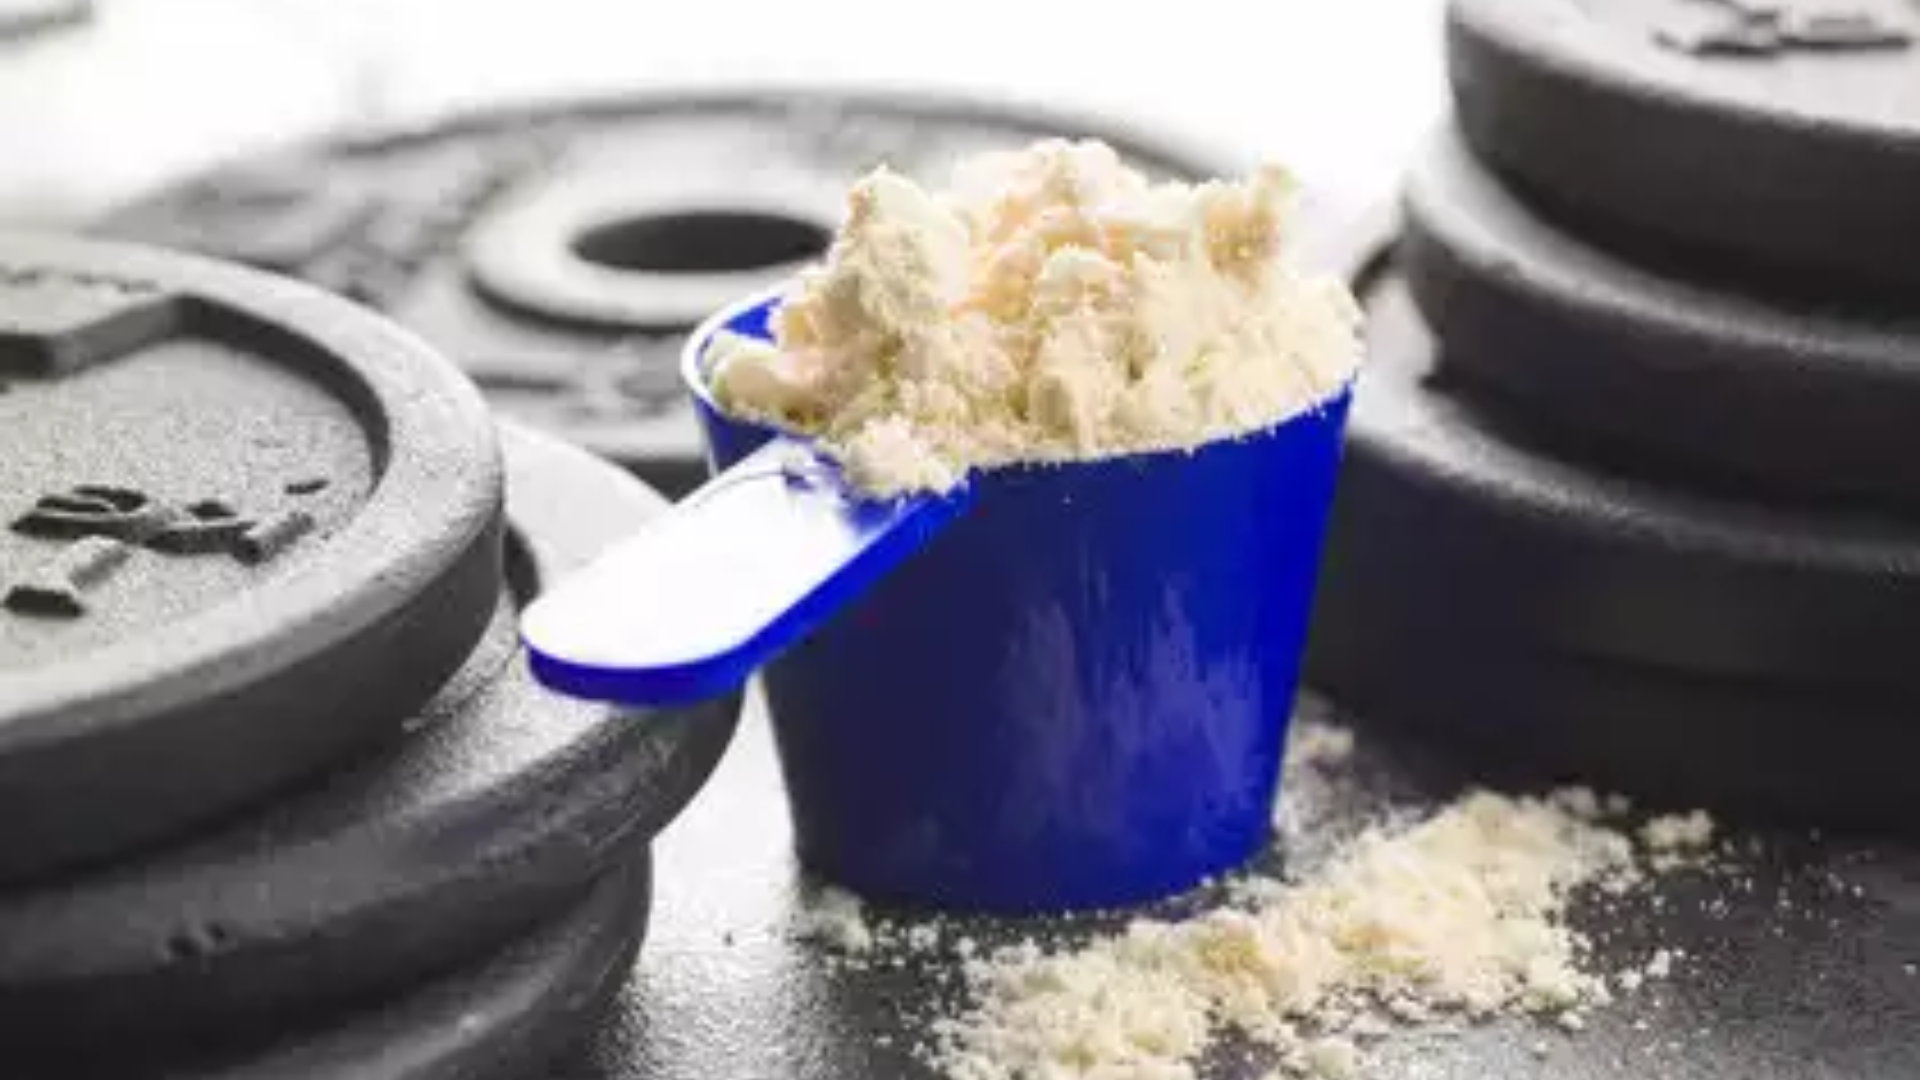 Majority of Protein Powders in India Fail Quality Standards, Reveals Groundbreaking Study